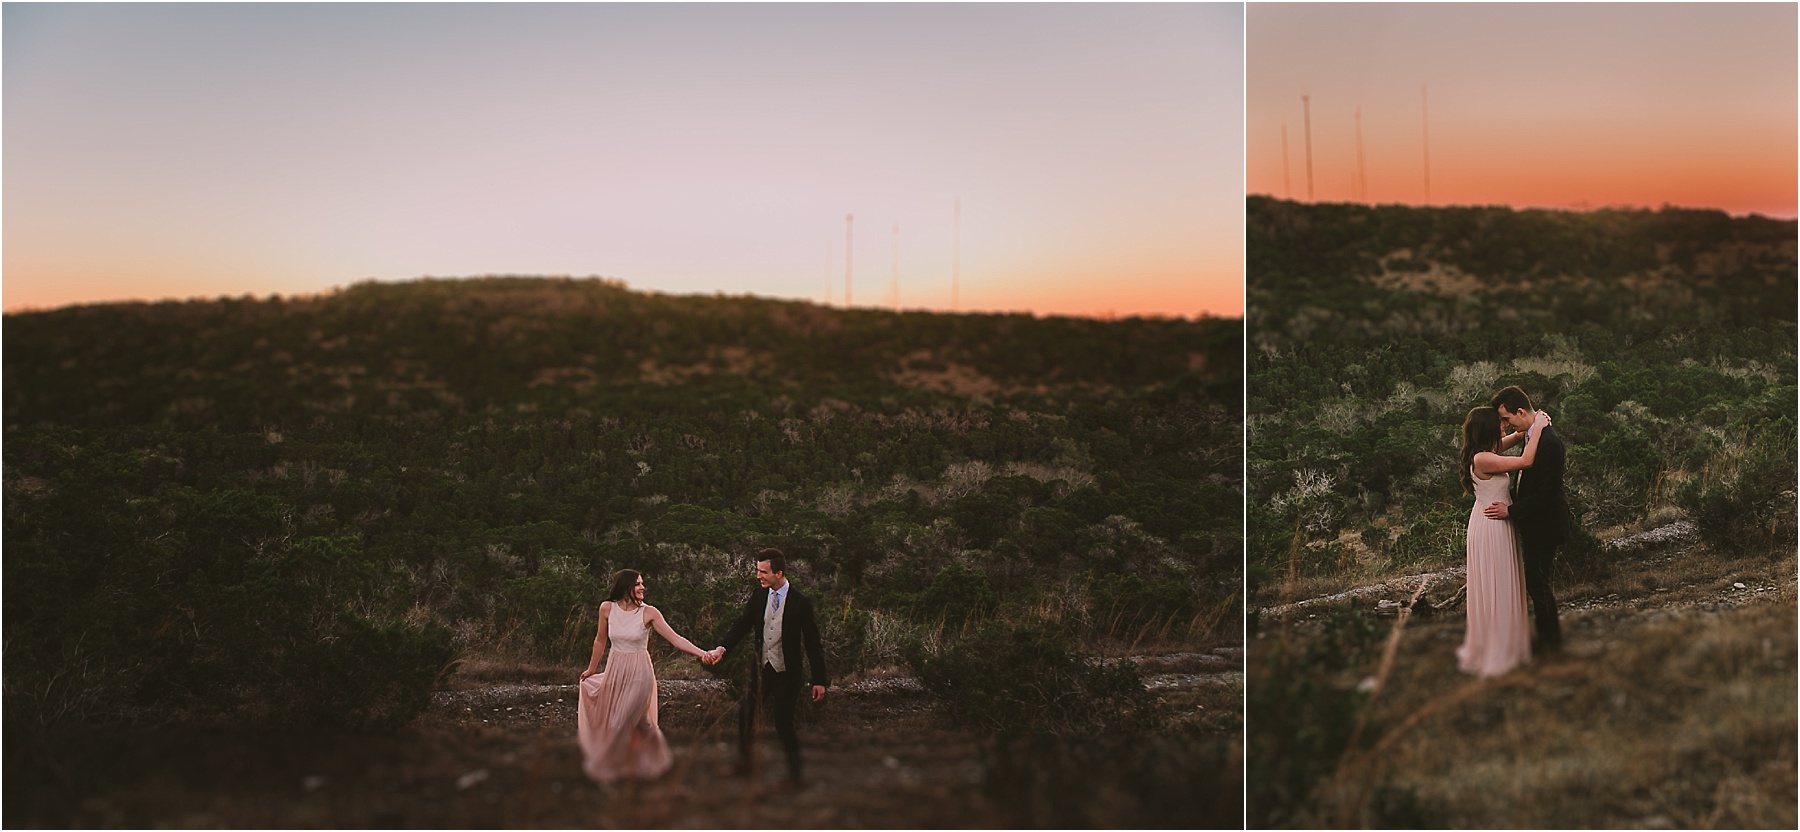 texas-photography-engagements-fortworth